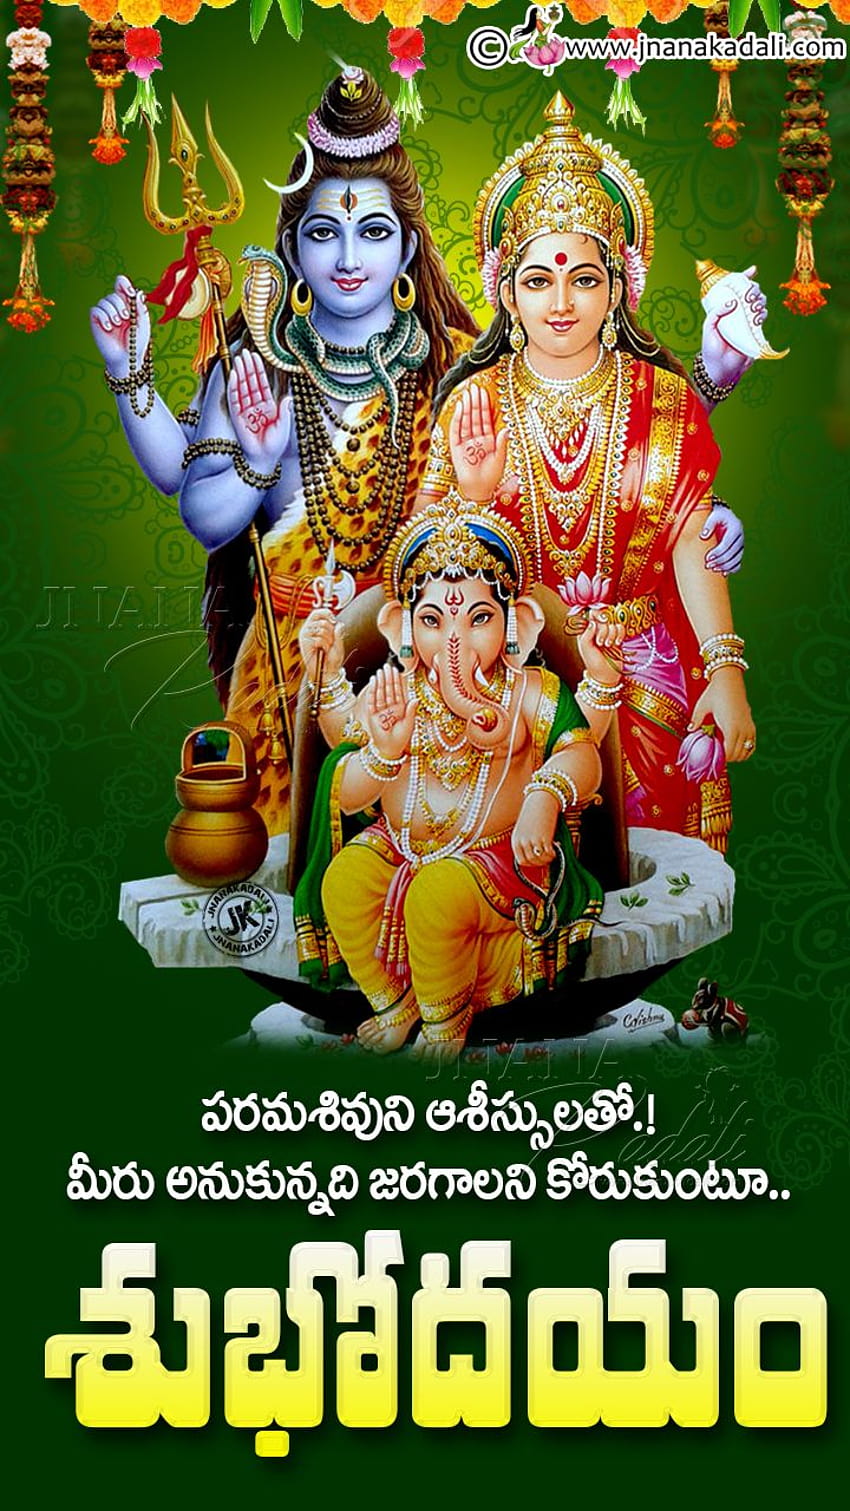 Lords Shiva Parvathi with Good Morning Greetings in Telugu HD ...